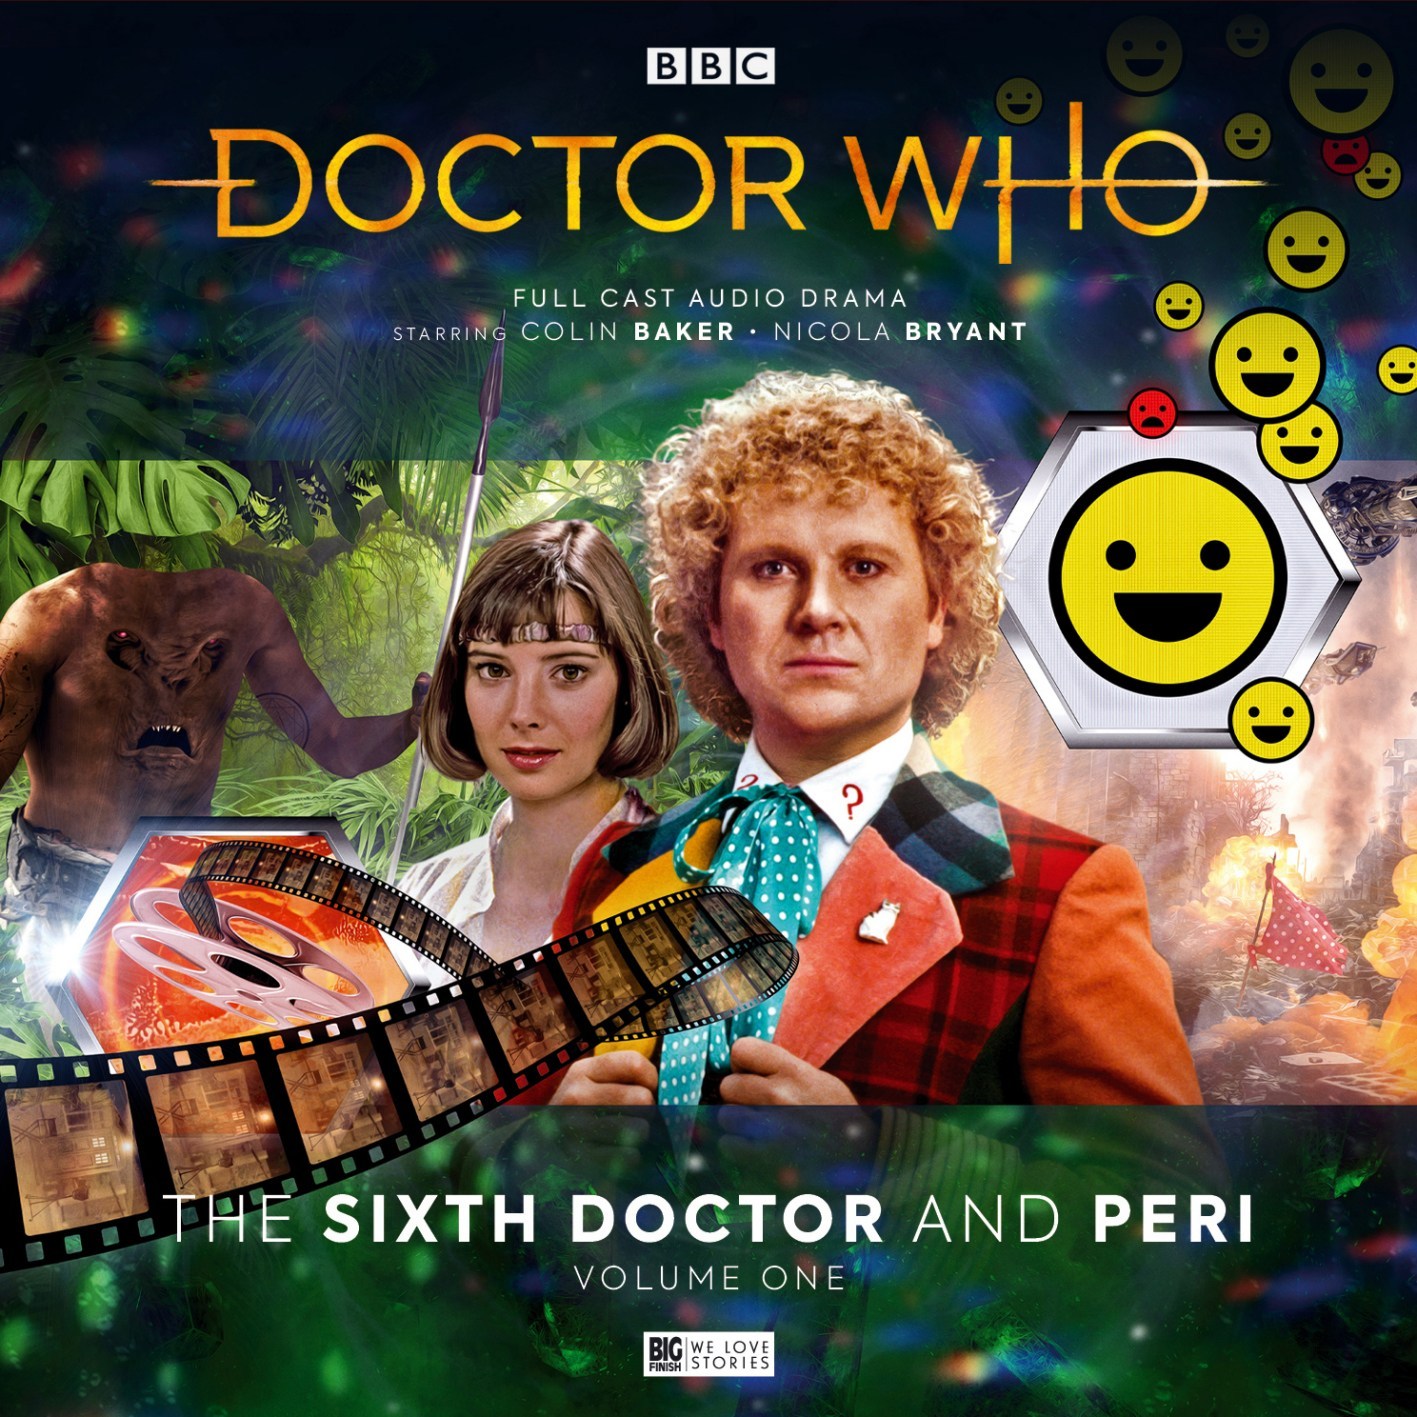 The Sixth Doctor and Peri Volume 1